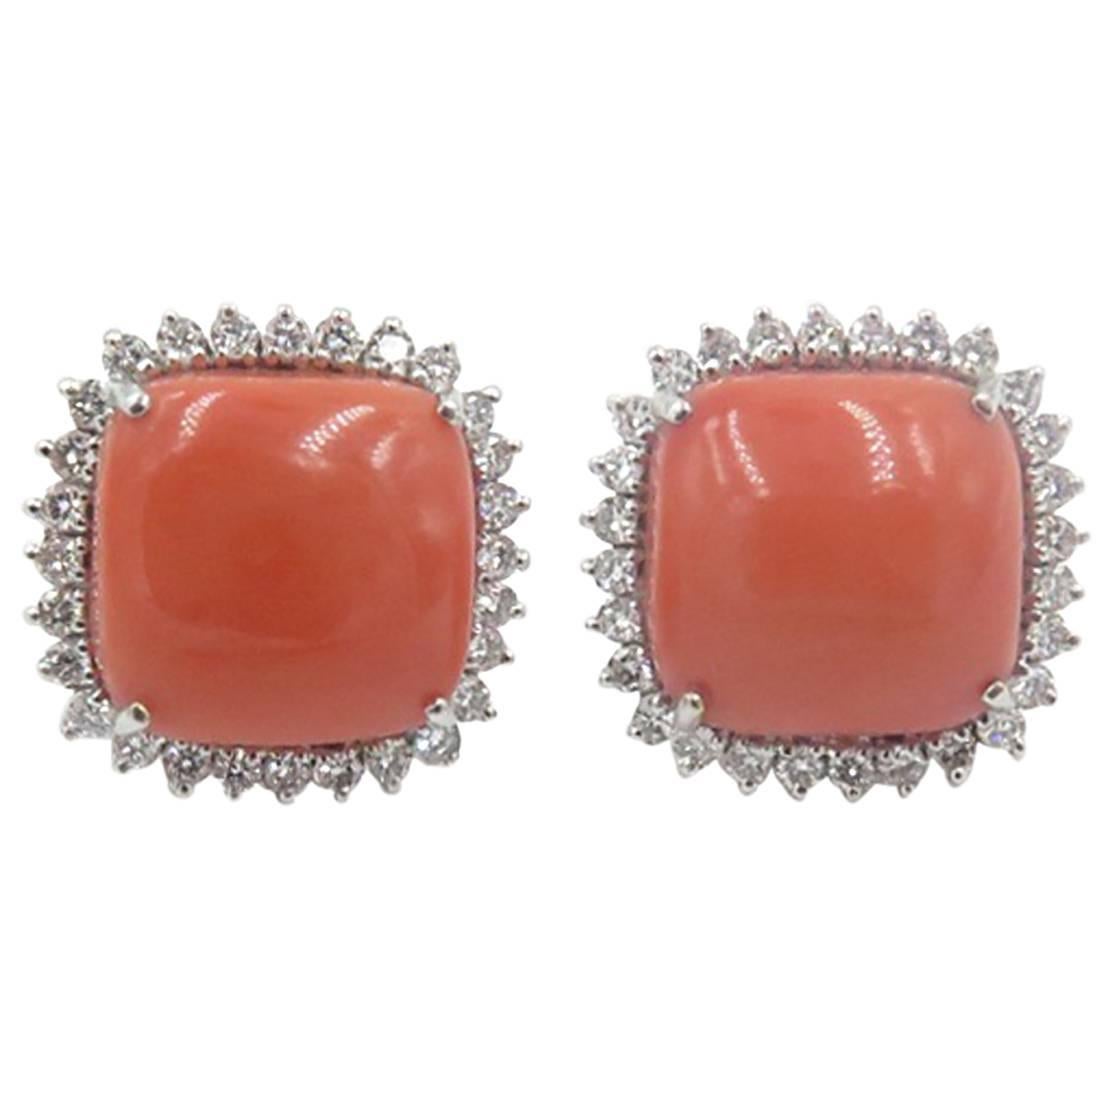 A Beautiful Pair of Coral and Diamond Earrings.